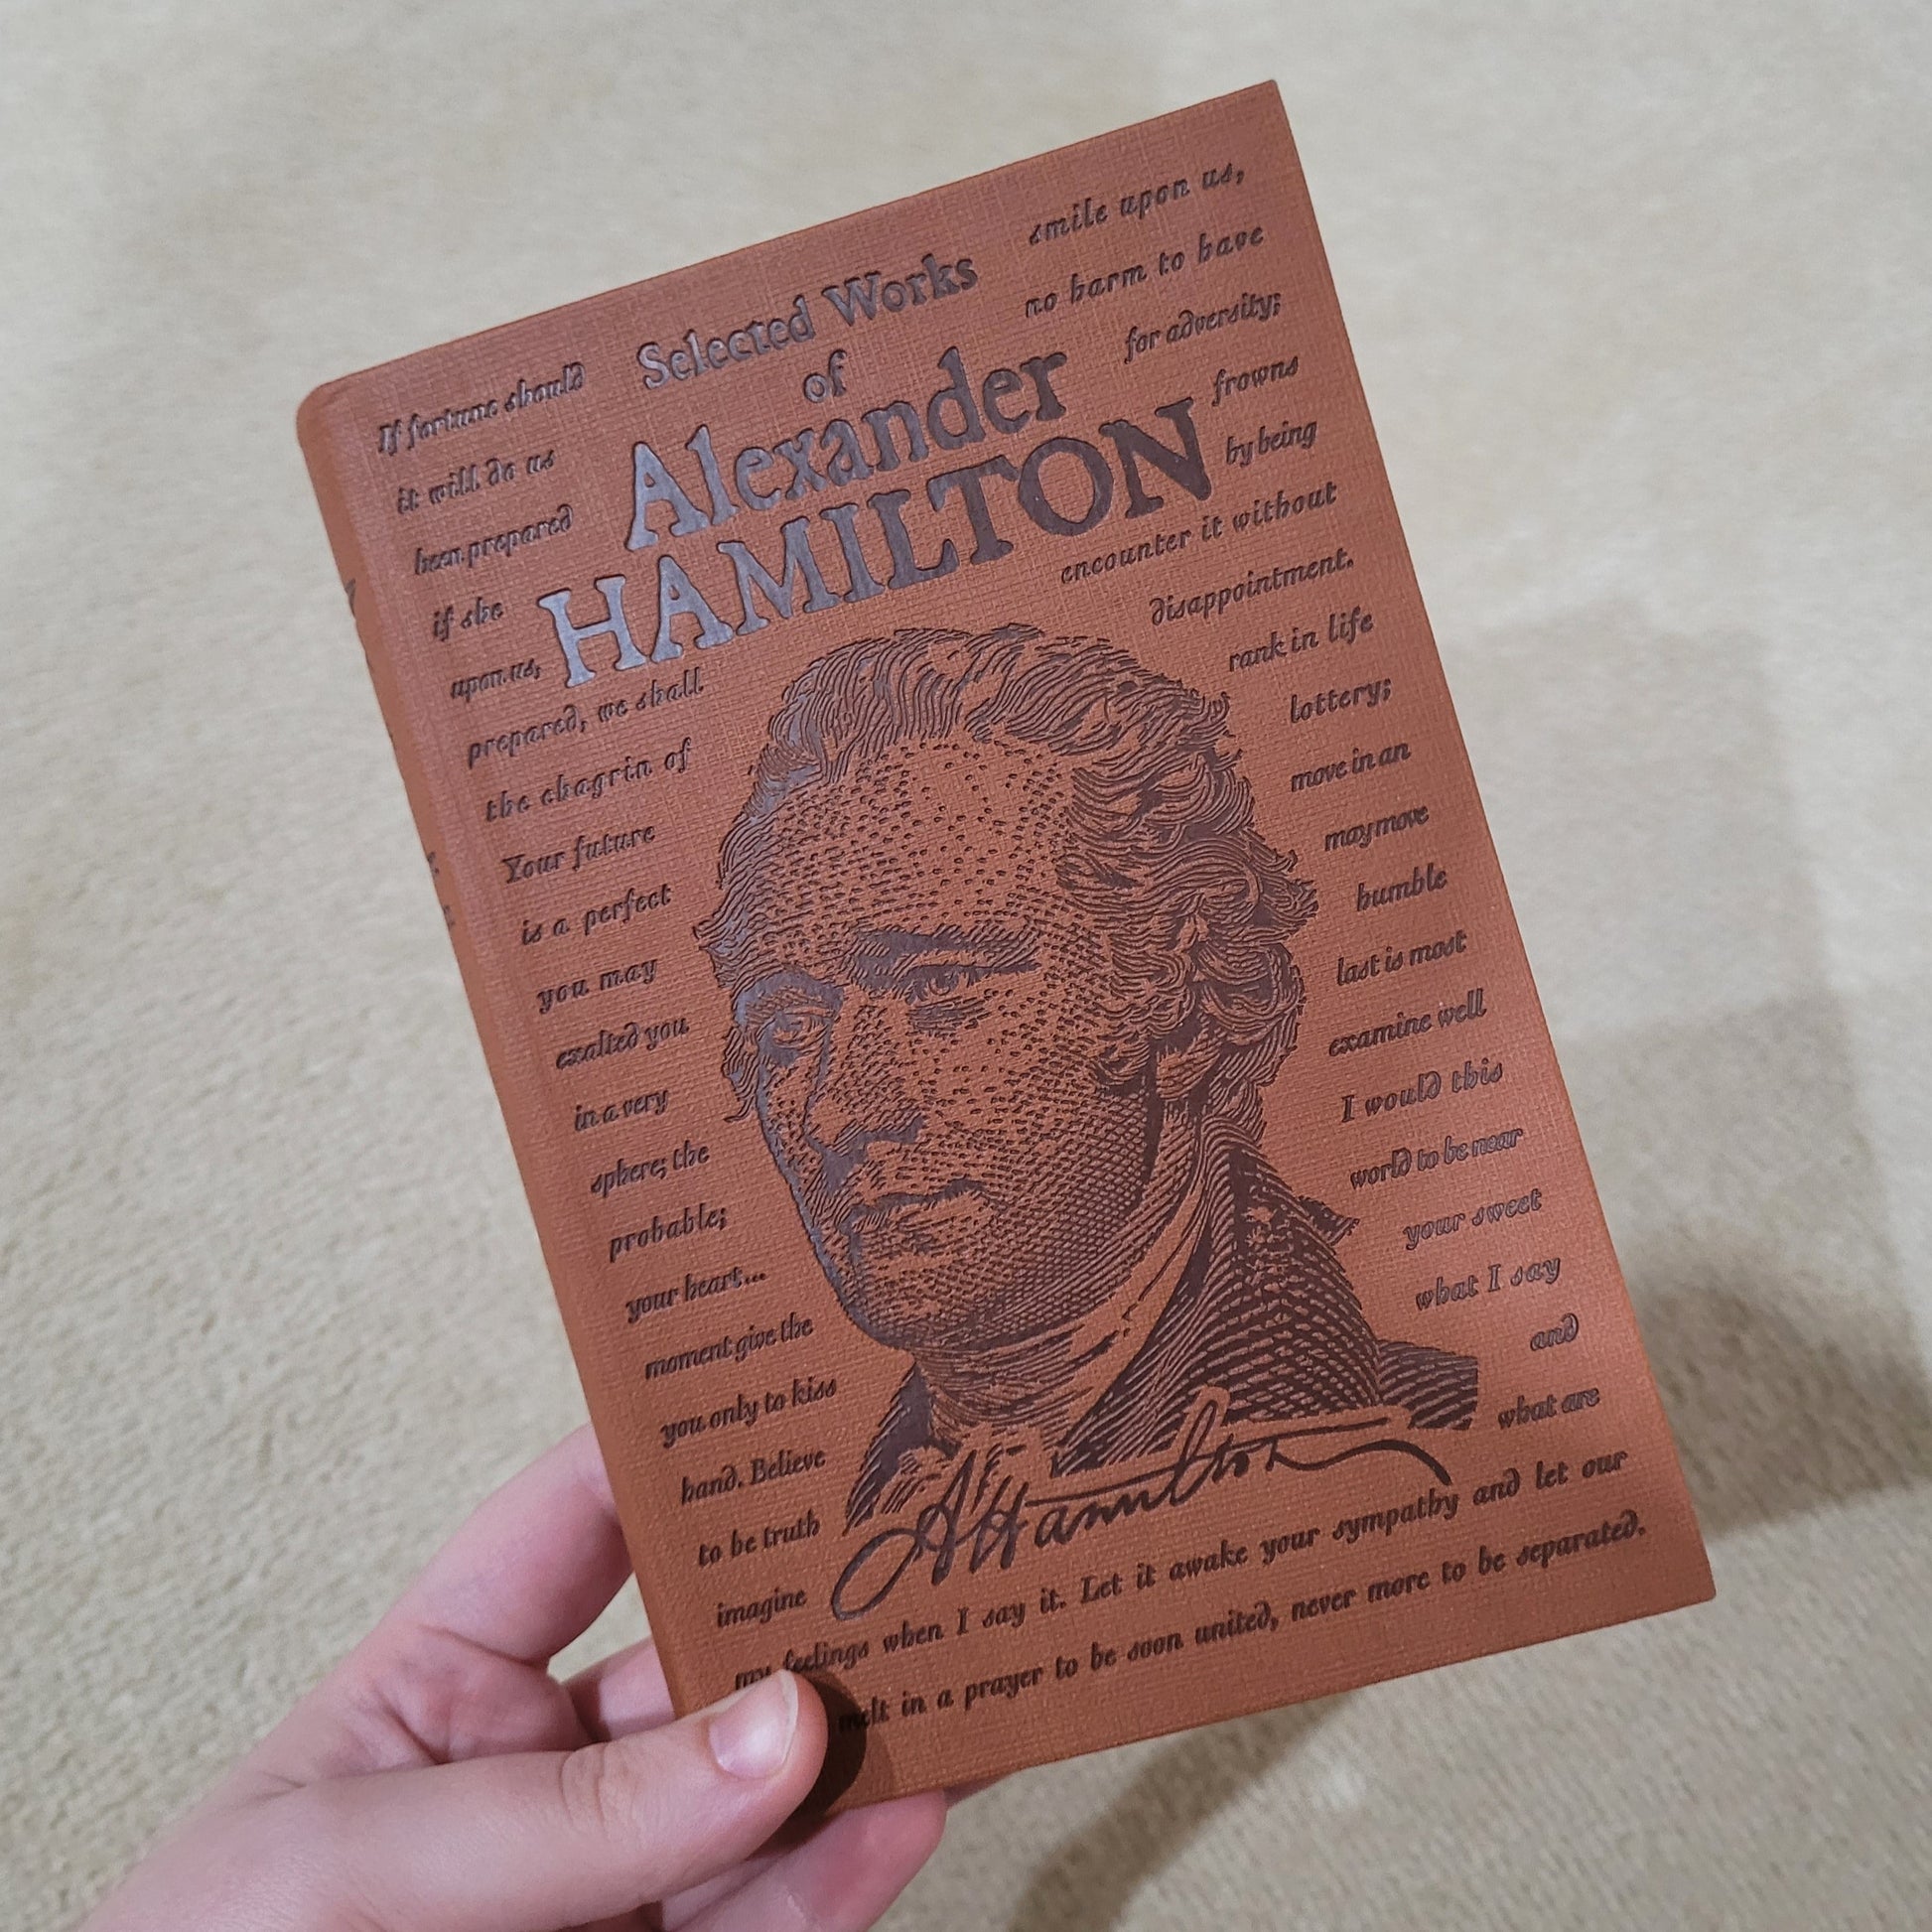 The front of the book fold "the selected works of Alexander Hamilton"